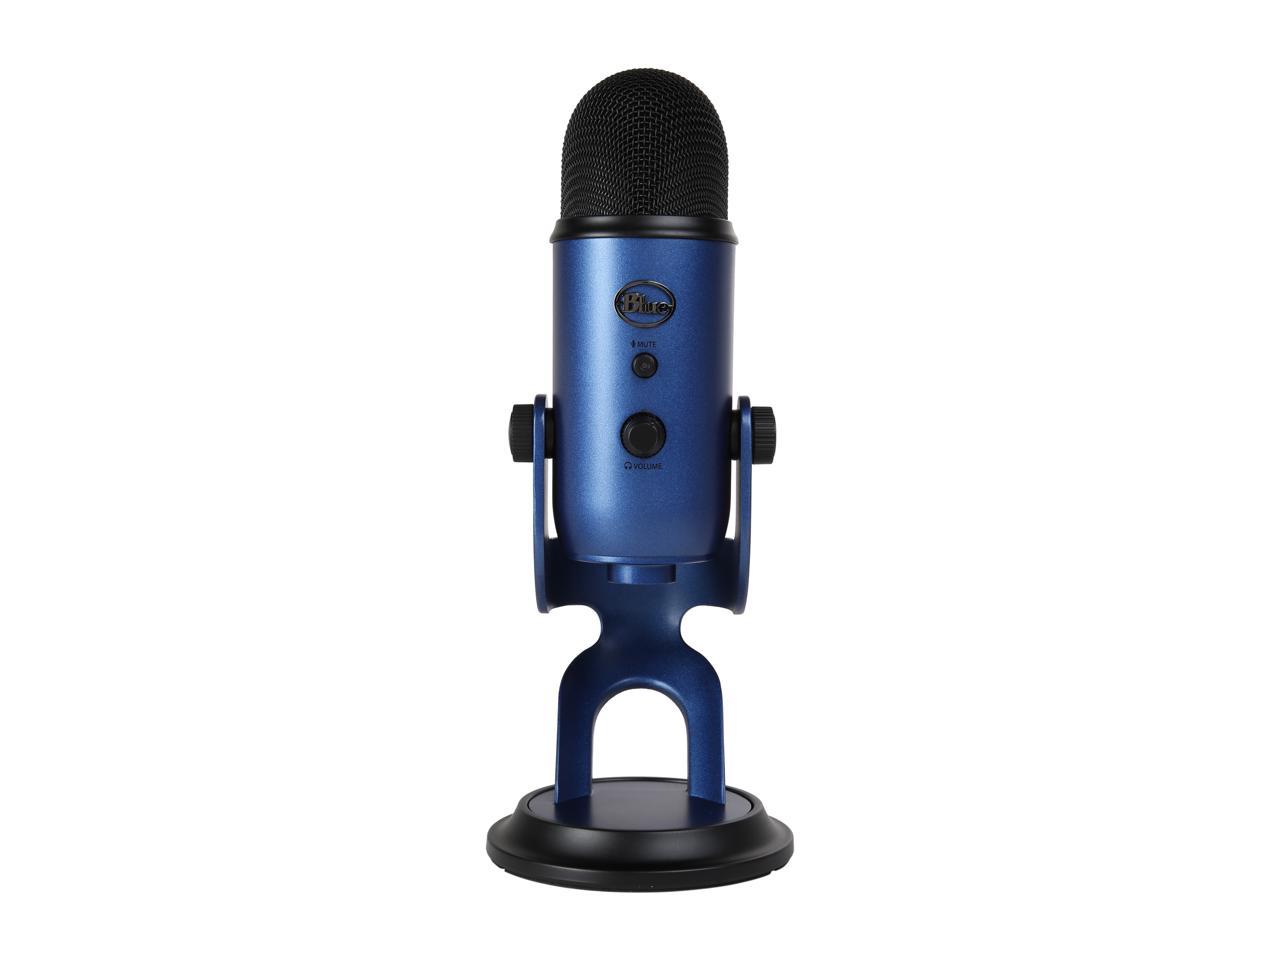 Blue Yeti USB Microphone for PC, Mac, Gaming, Recording, Streaming, Podcasting, Studio and Computer Condenser Mic with Blue VO!CE effects, 4 Pickup Patterns, Plug and Play – Midnight Blue - image 2 of 7